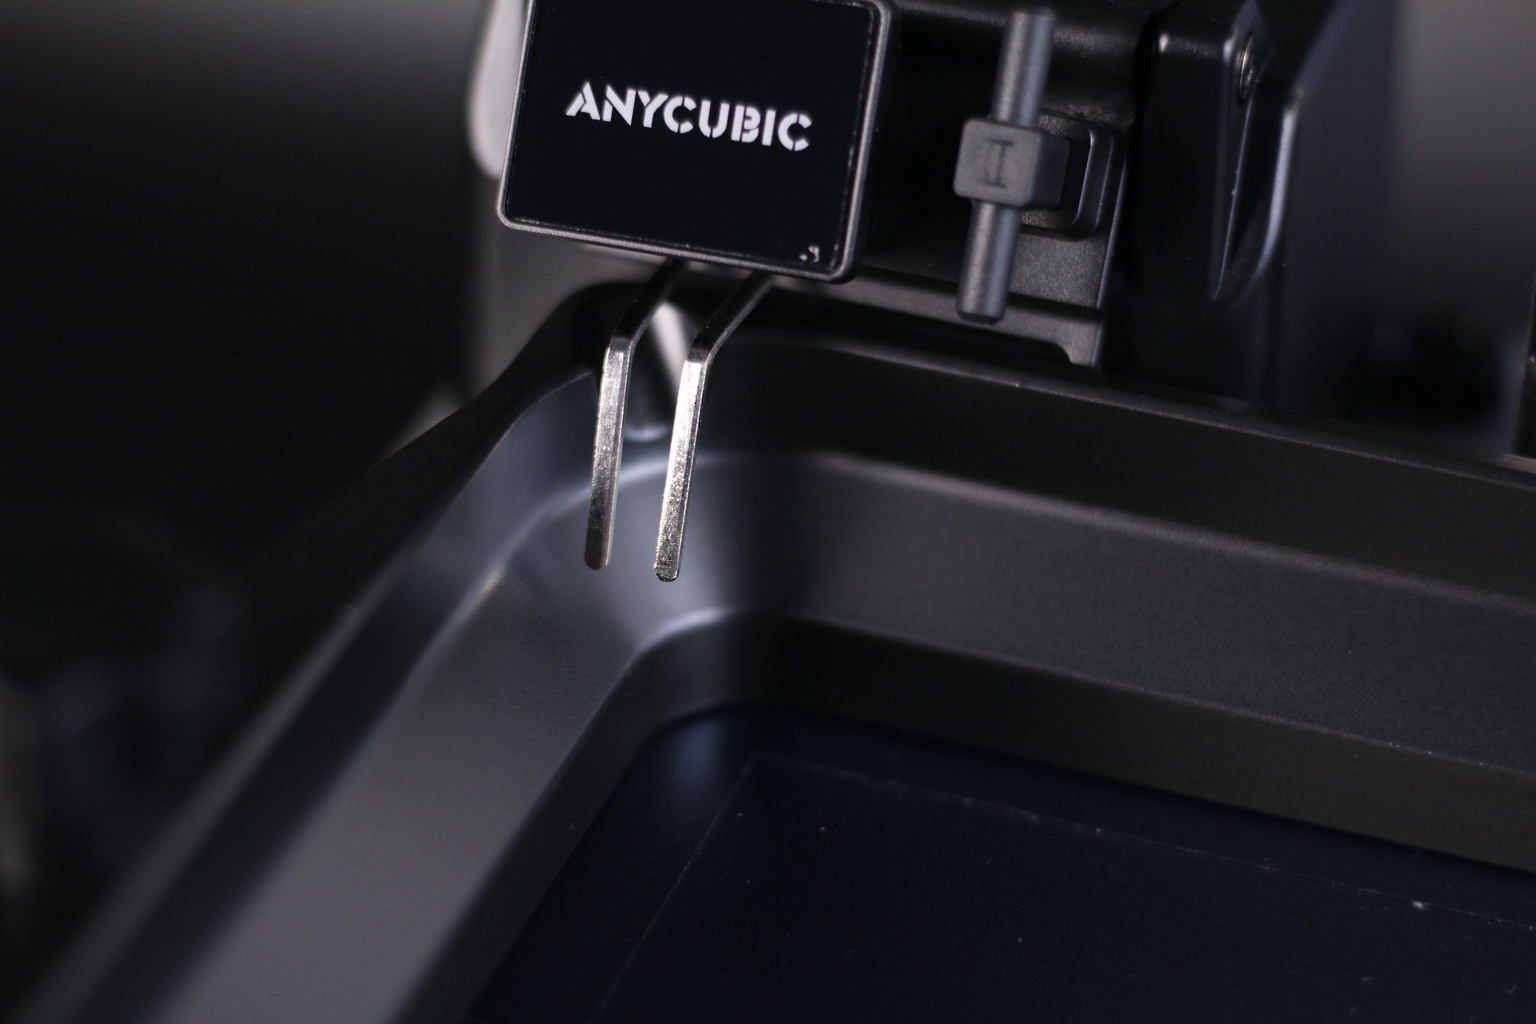 Anycubic M3 Pro and Max resin sensor | Anycubic Photon M3 Max Review: Who Needs FDM Anymore?